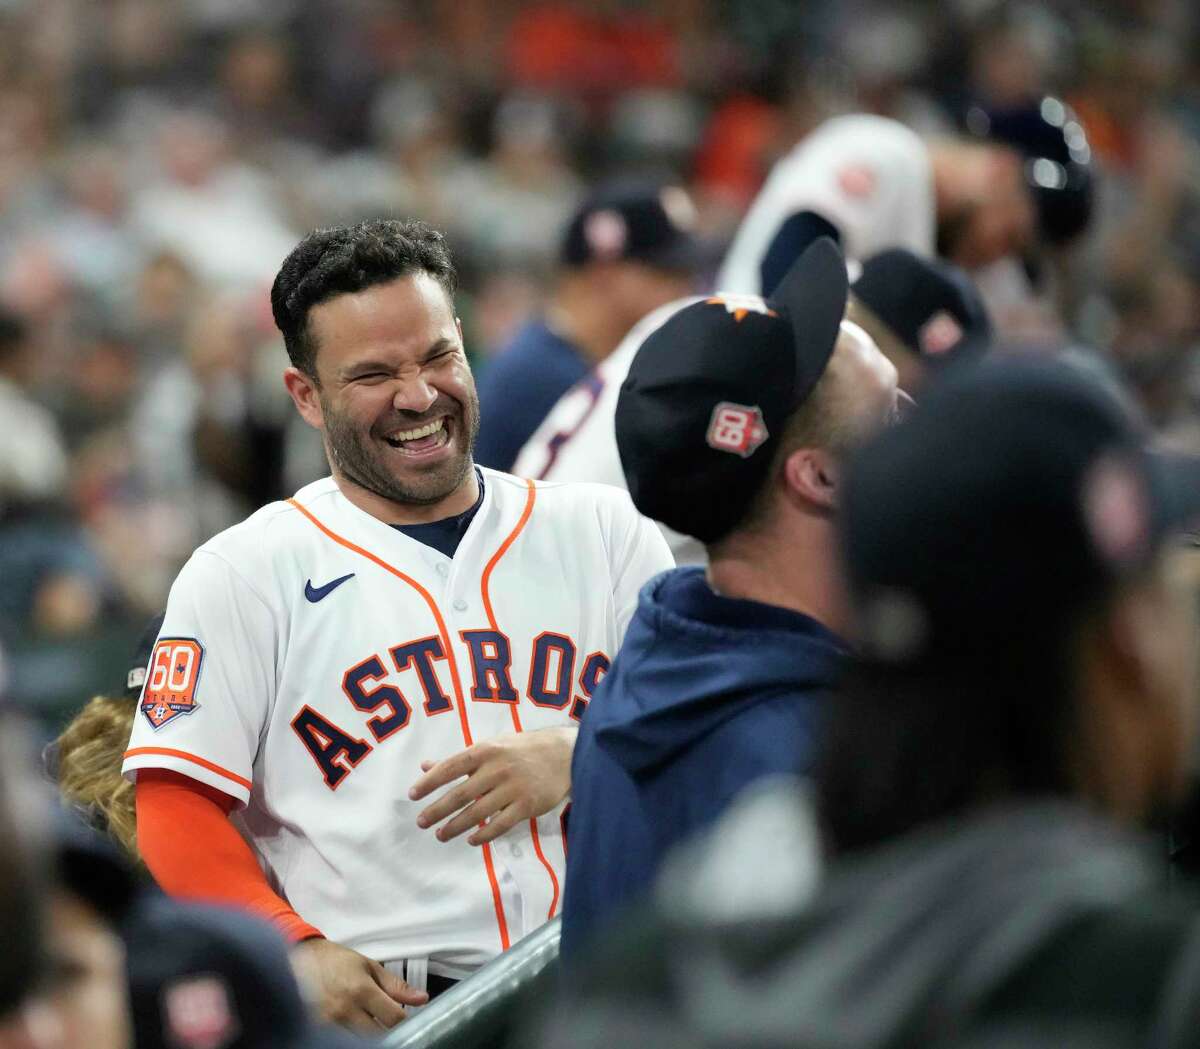 Houston Astros Jose Altuve (27) laughs as he celebrated his home run after it was umpire reviewed for possible fan interference but upheld during the third inning of a game at Minute Maid Park on Tuesday, Sept. 6, 2022.